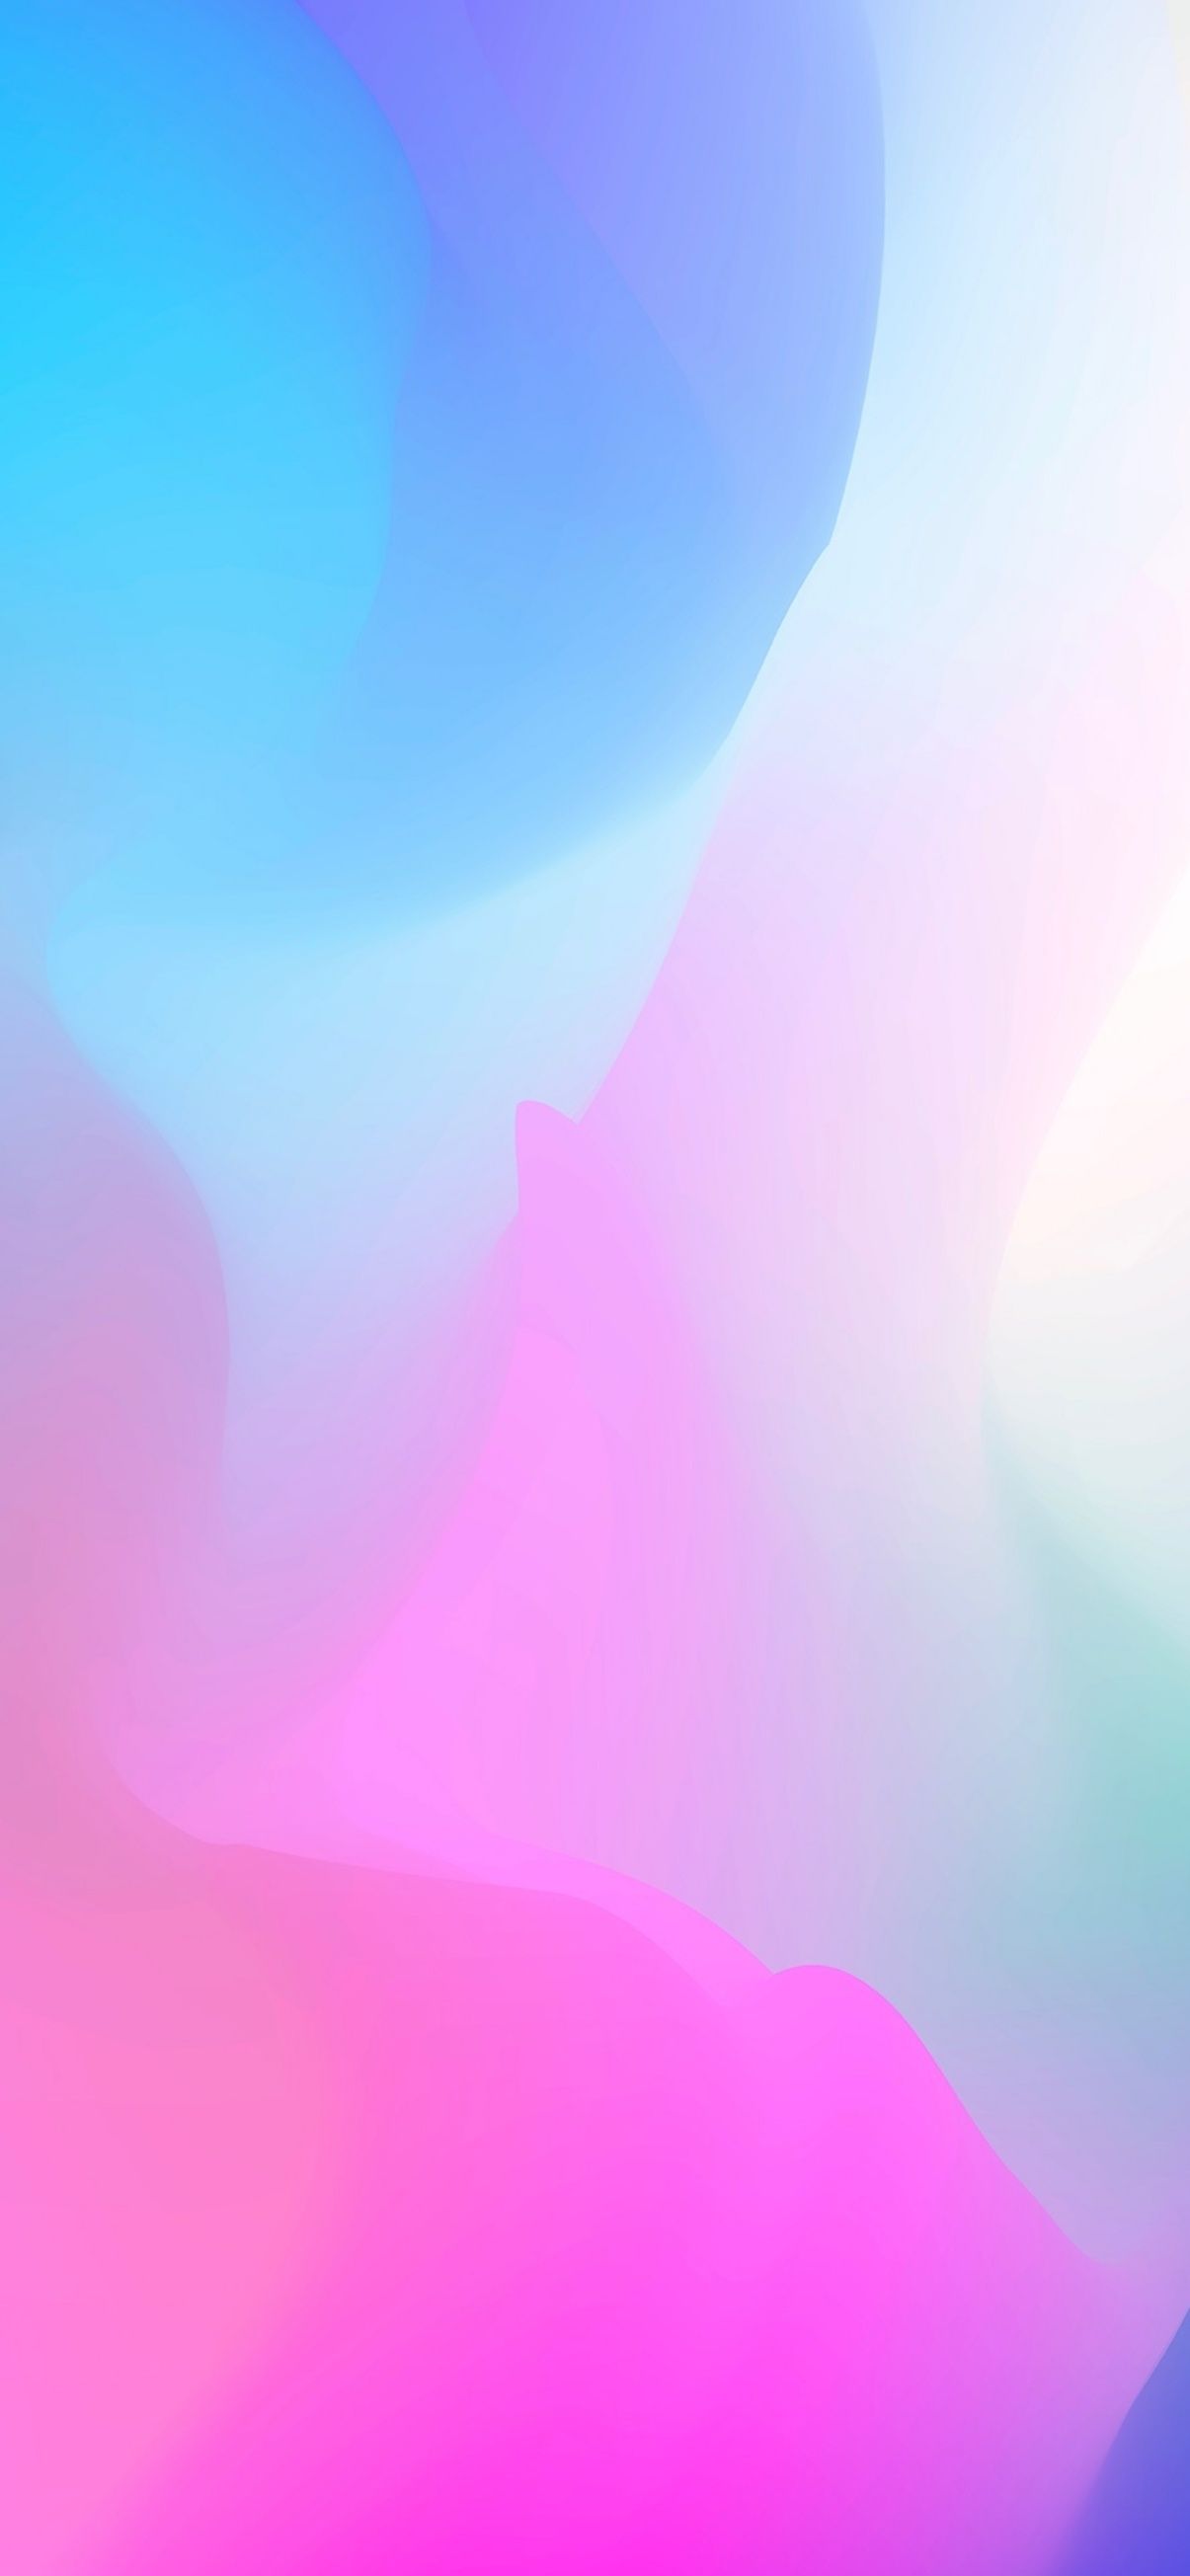 Download wallpapers 1242x2688 Samsung Galaxy S10, abstract, pastel colors, gradient, colorful backgrounds, abstract art, gradient art, 5G, Samsung Galaxy S10 5G, Samsung for desktop and mobile devices. - Clean